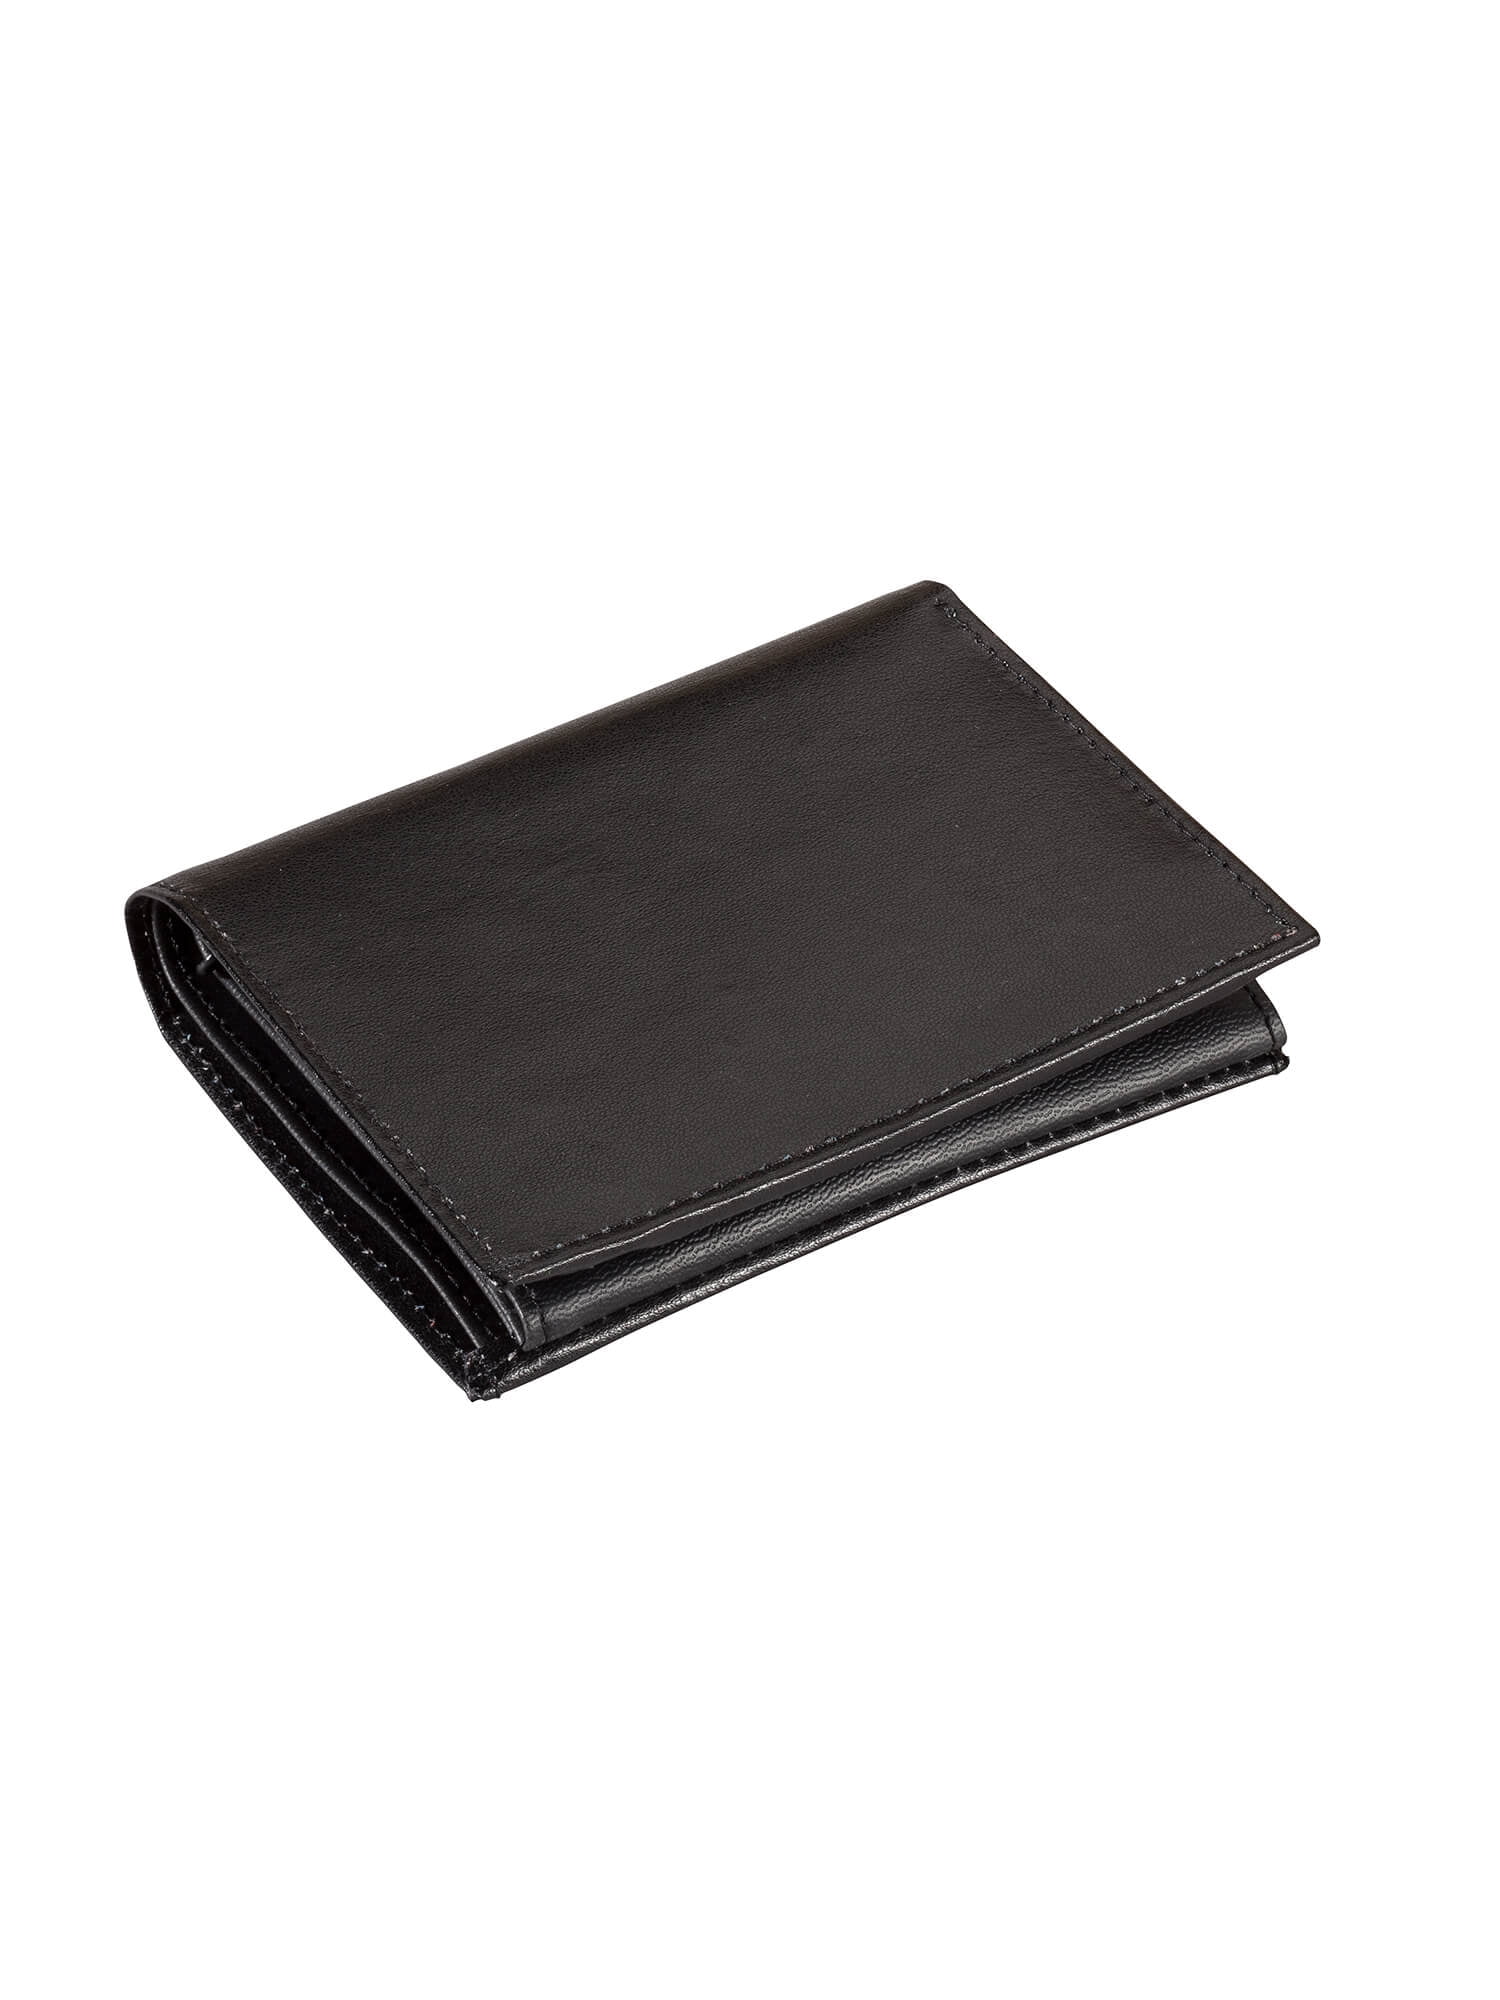 Black Leather 20 Credit Card wallet with RFID Technology 